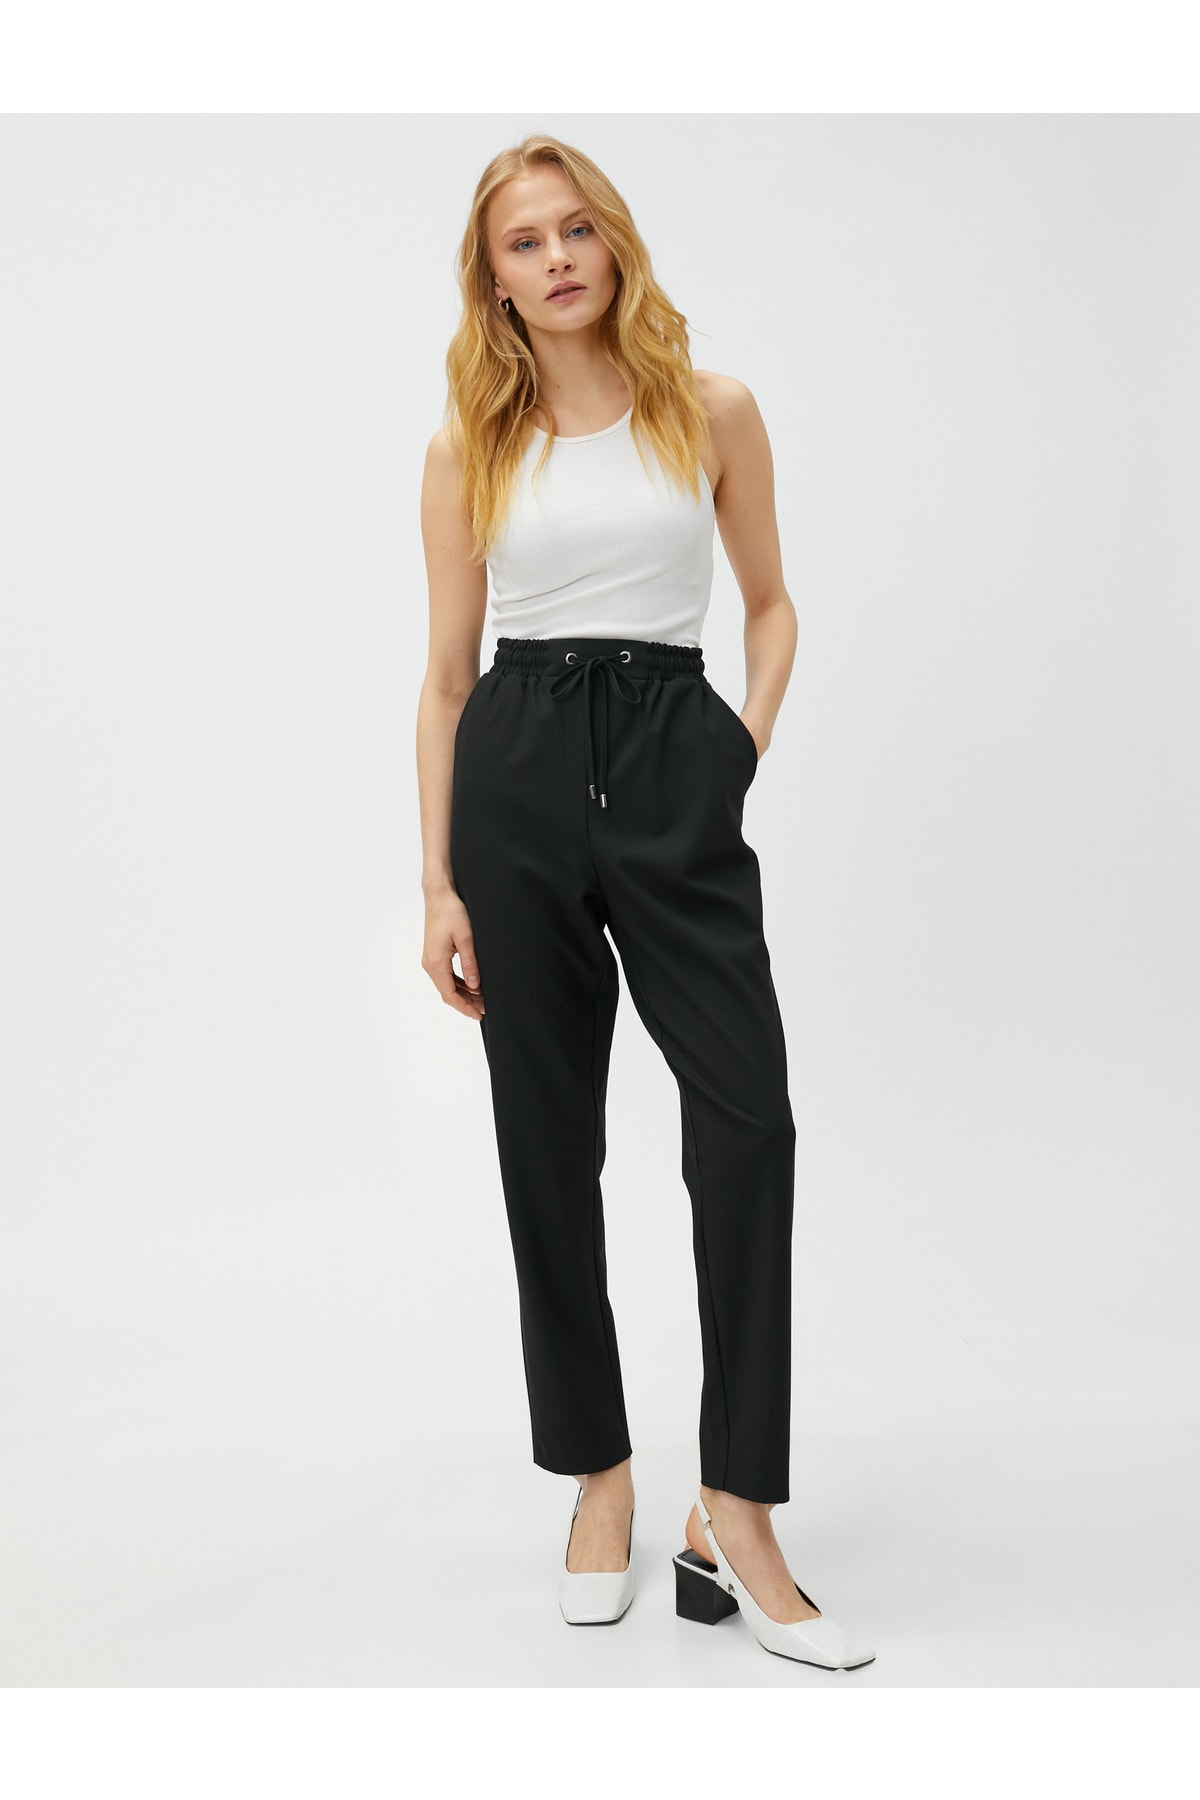 Koton Cloth Trousers with Tie Waist, Pockets